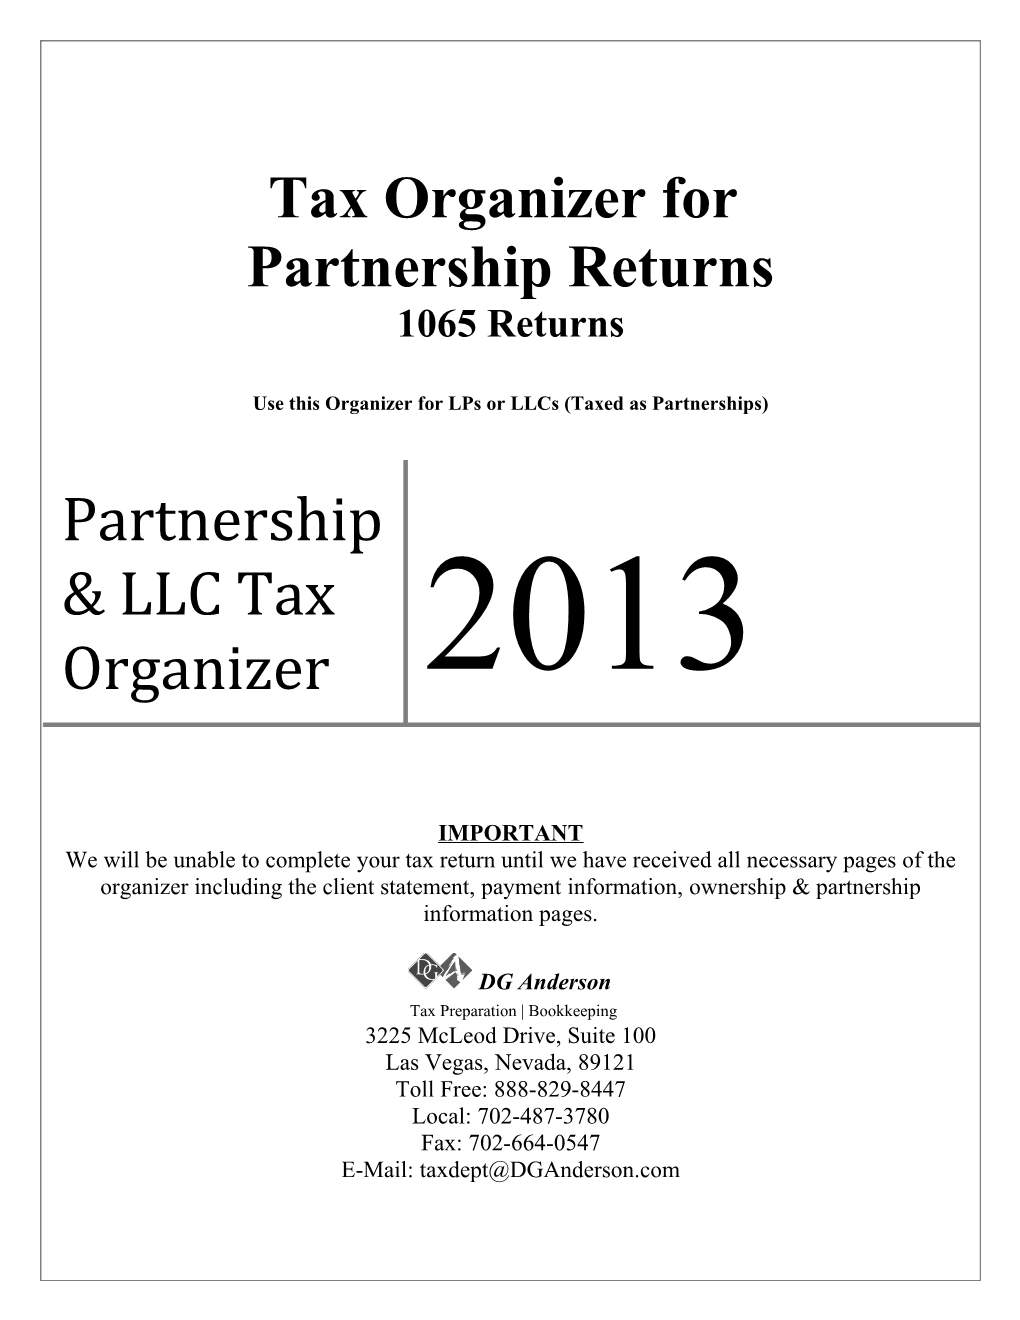 Use This Organizer for Lps Or Llcs (Taxed As Partnerships)